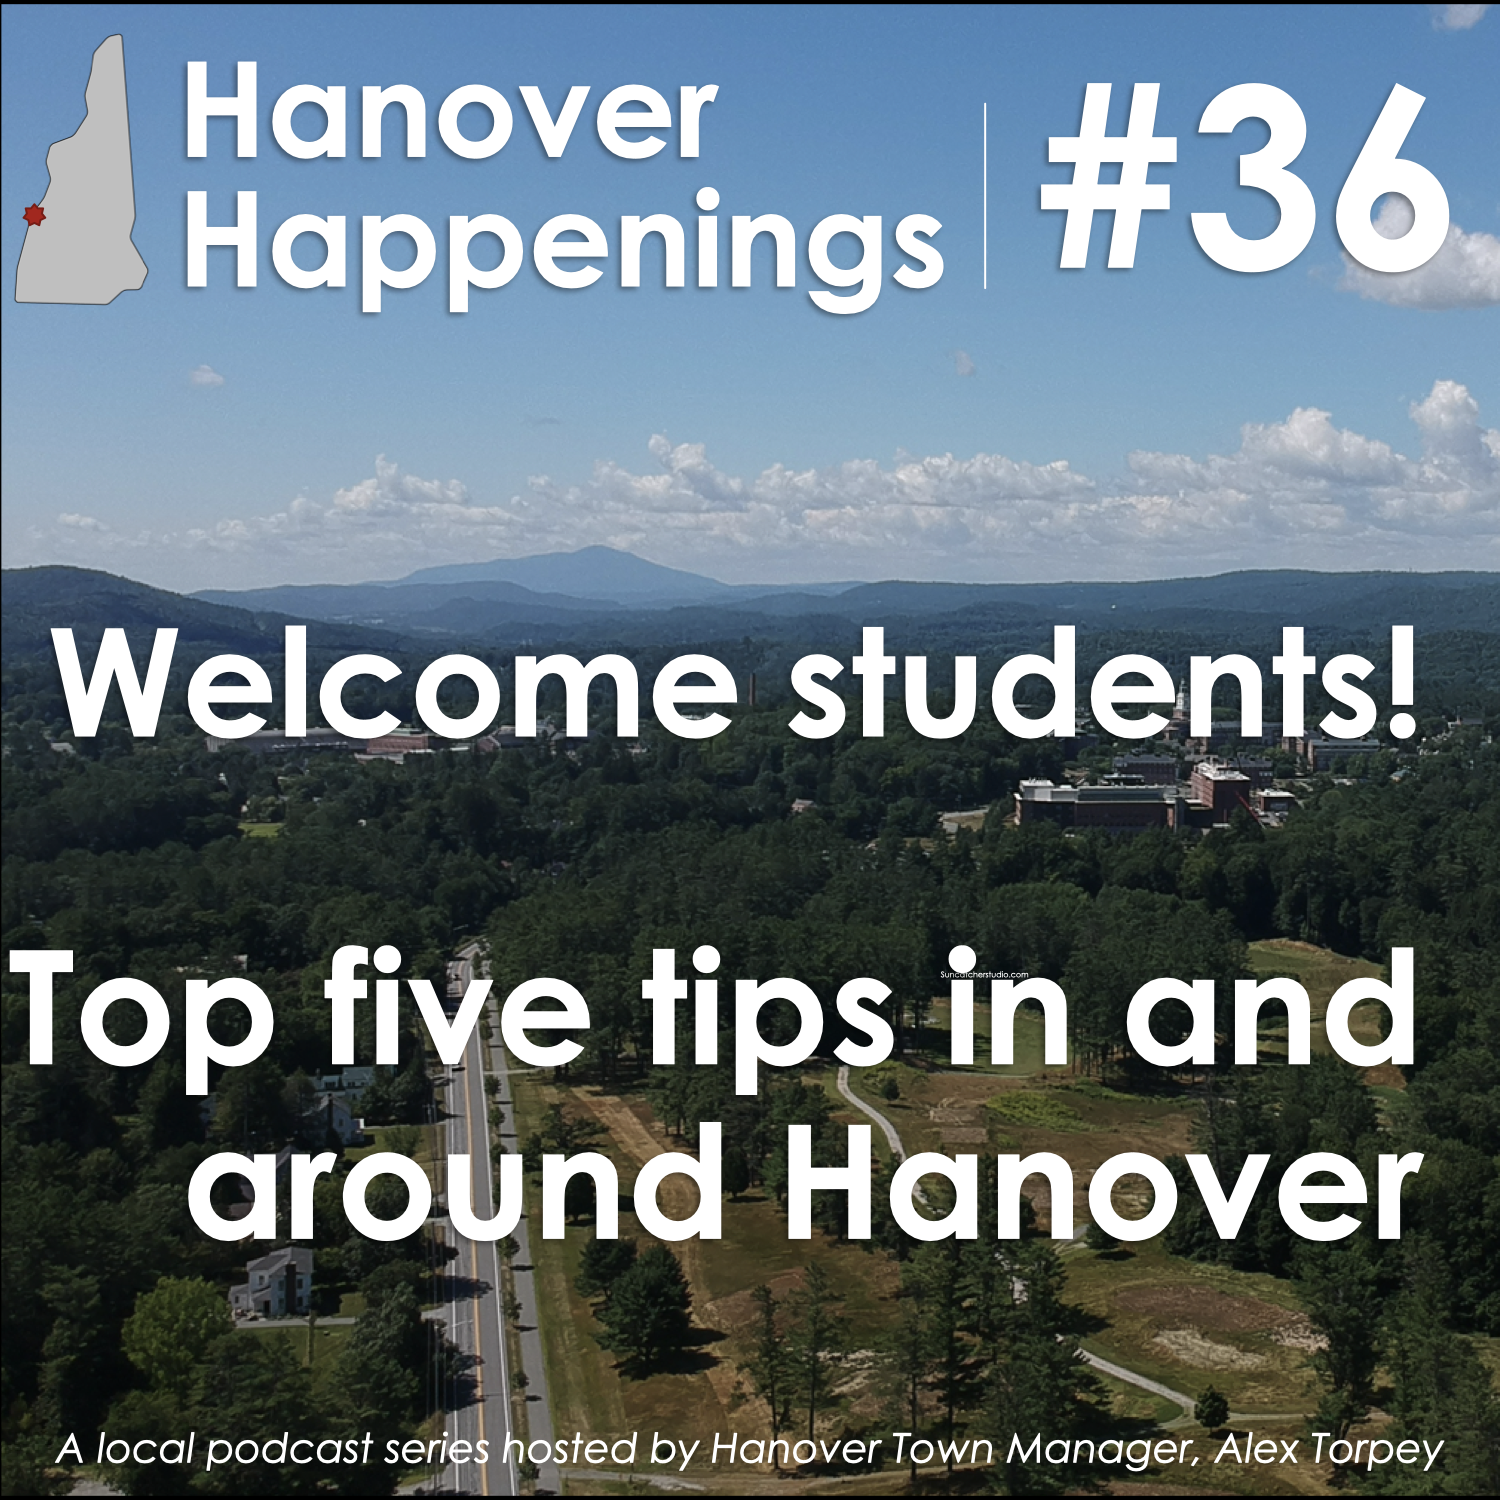 Welcome new and returning students - top 5 tips around Hanover